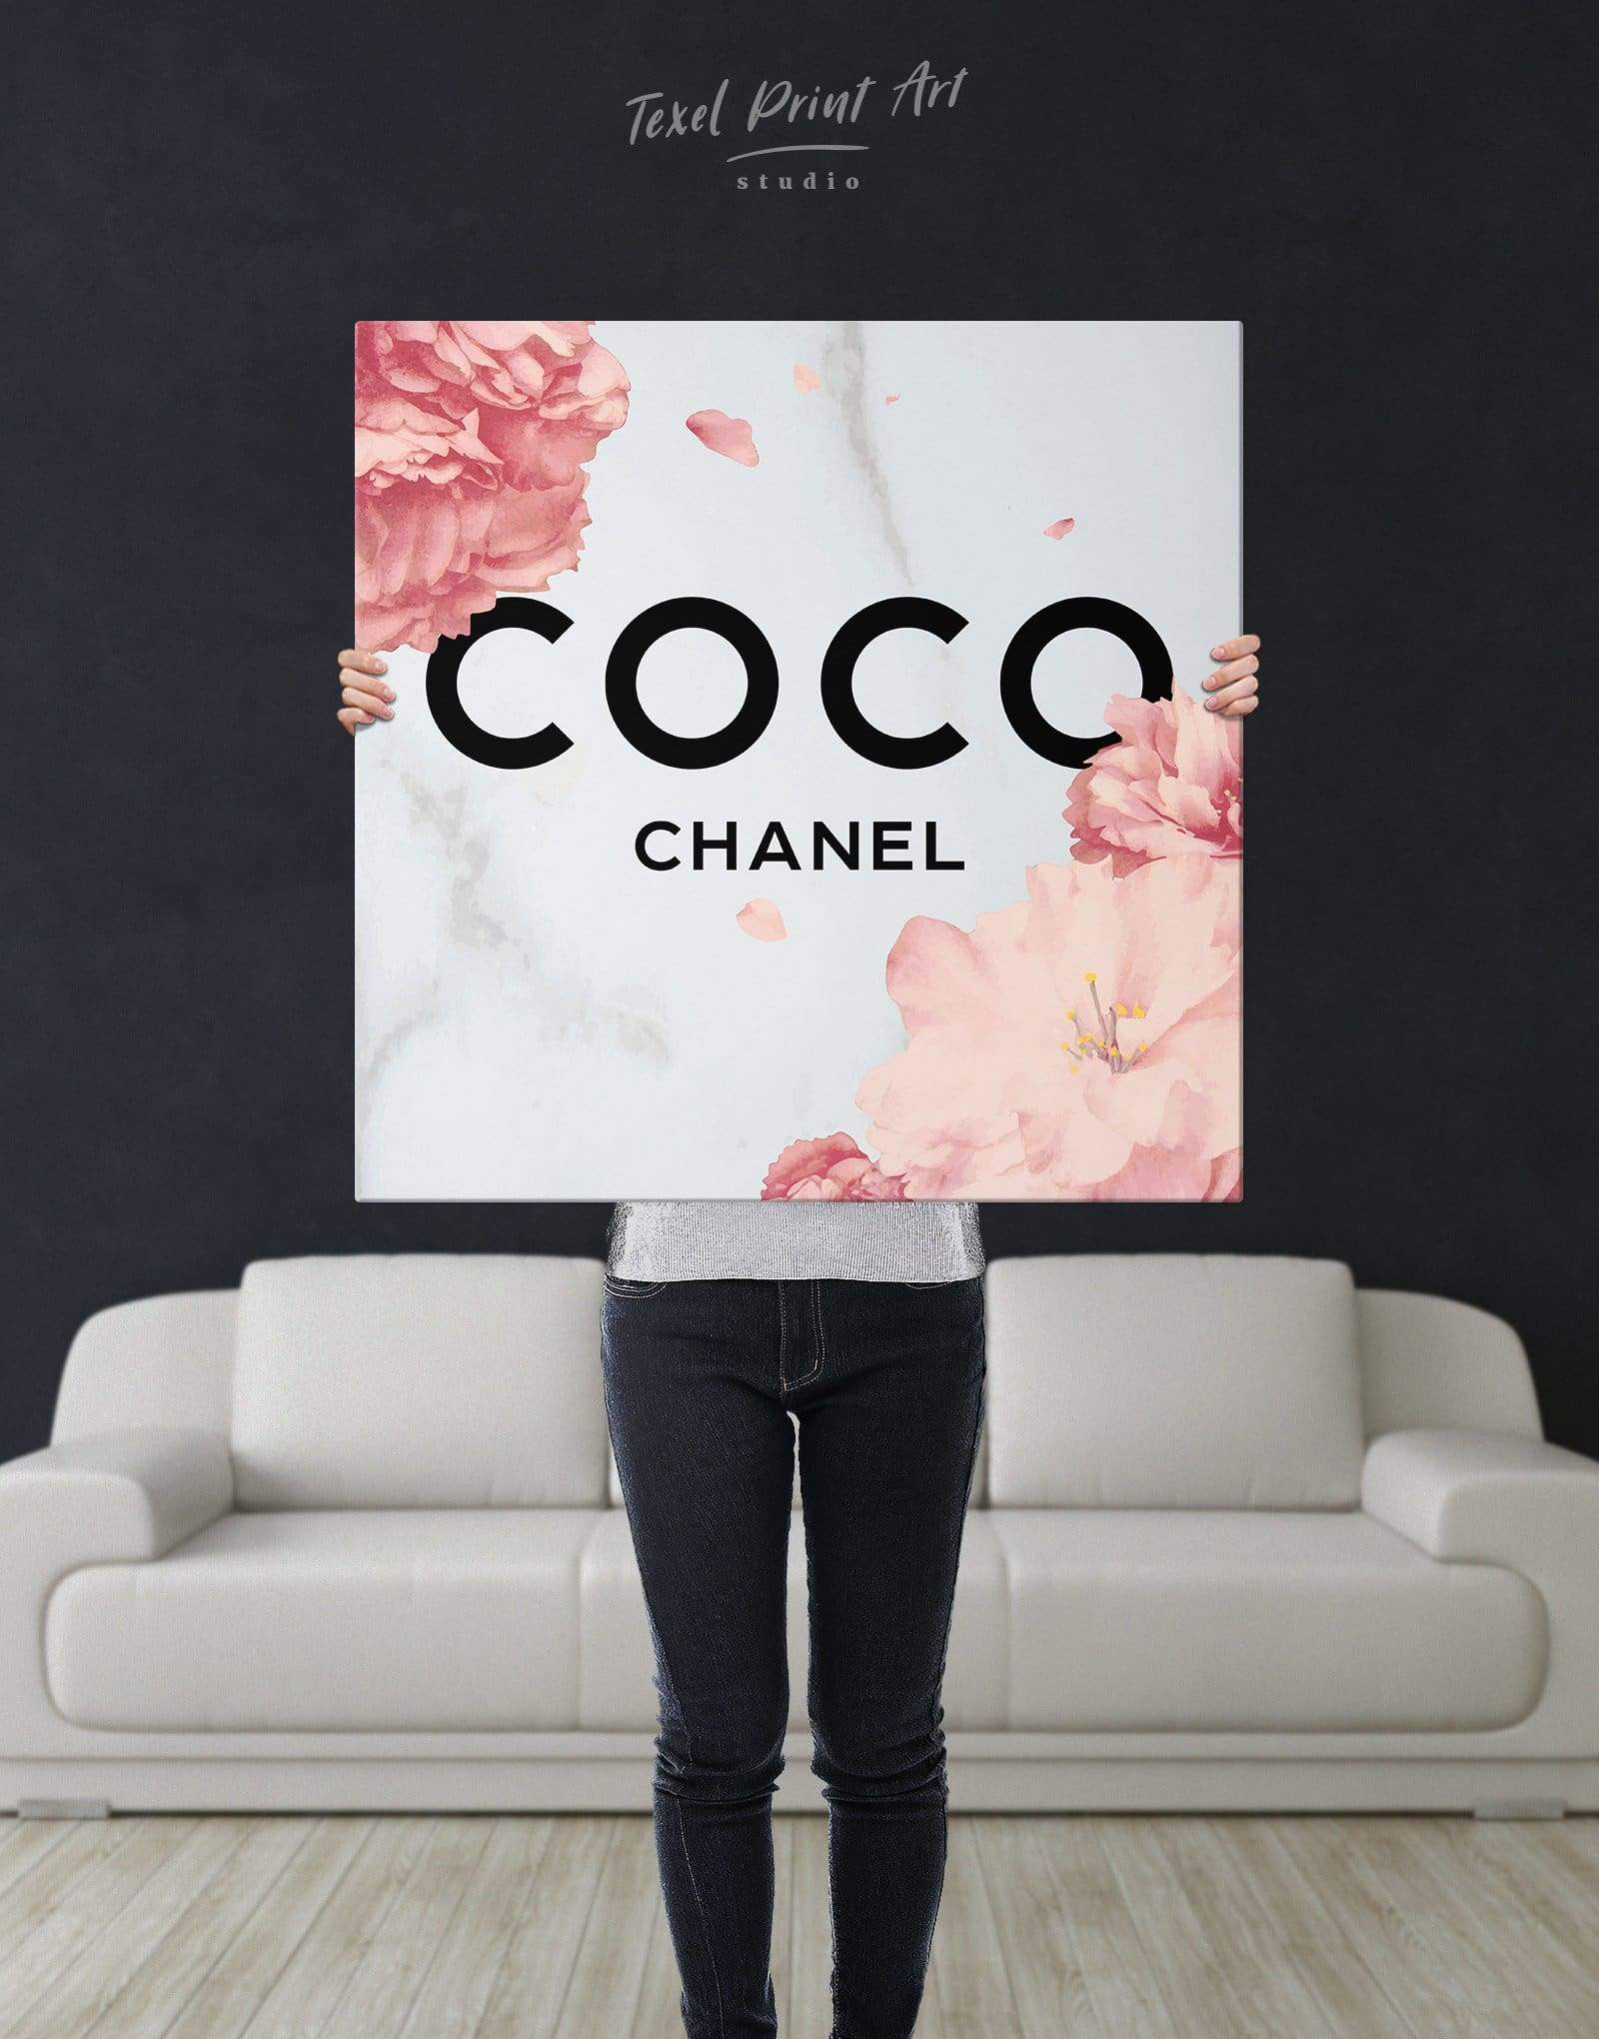 Chanel Logo and Quote Print  A1 to A4 Size  Miaandcostore